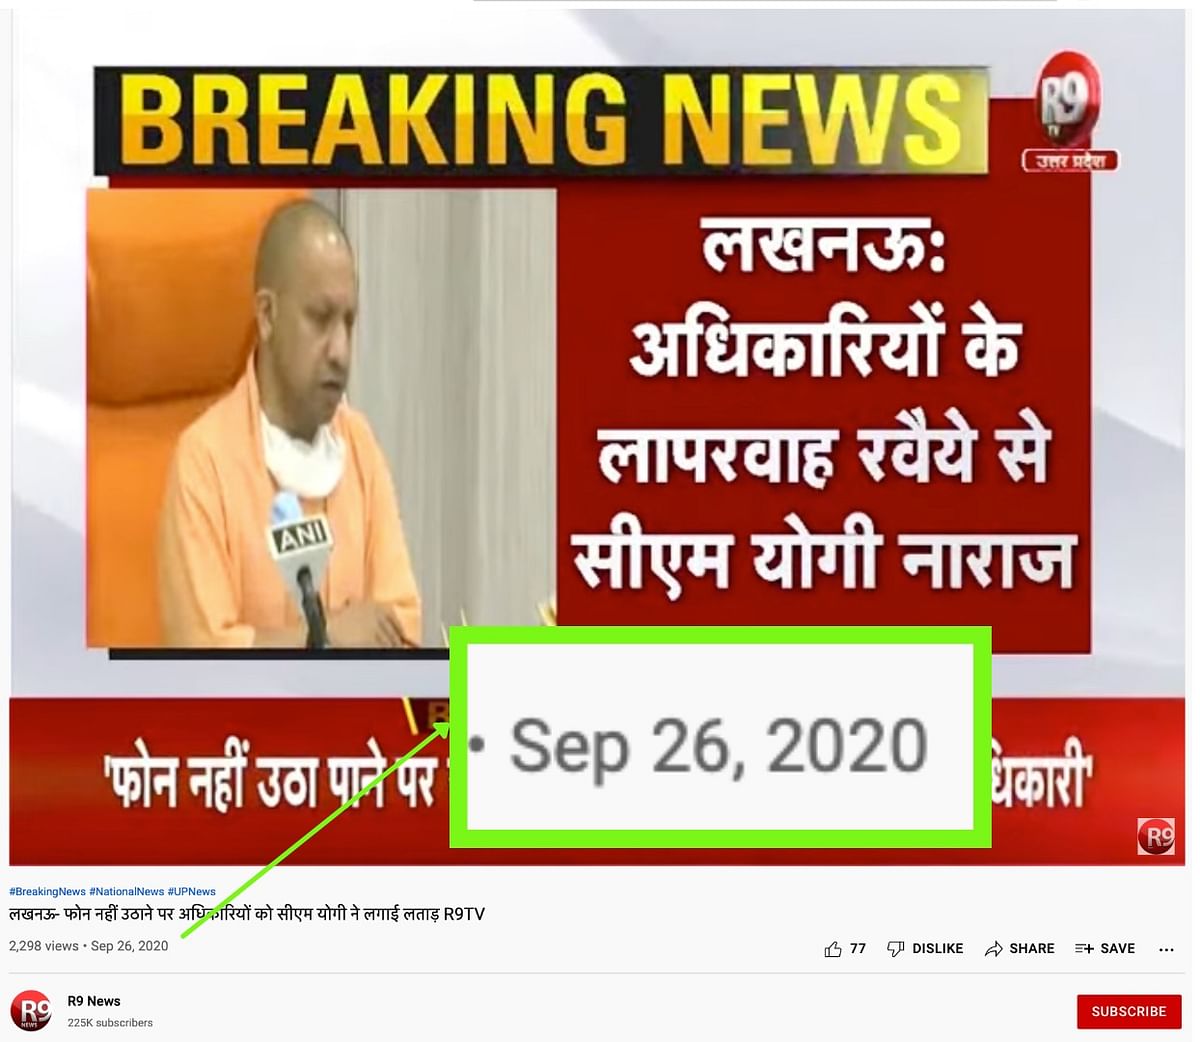 The video is from 2020 and shows Adityanath reprimanding government officials for not taking legislators' calls.